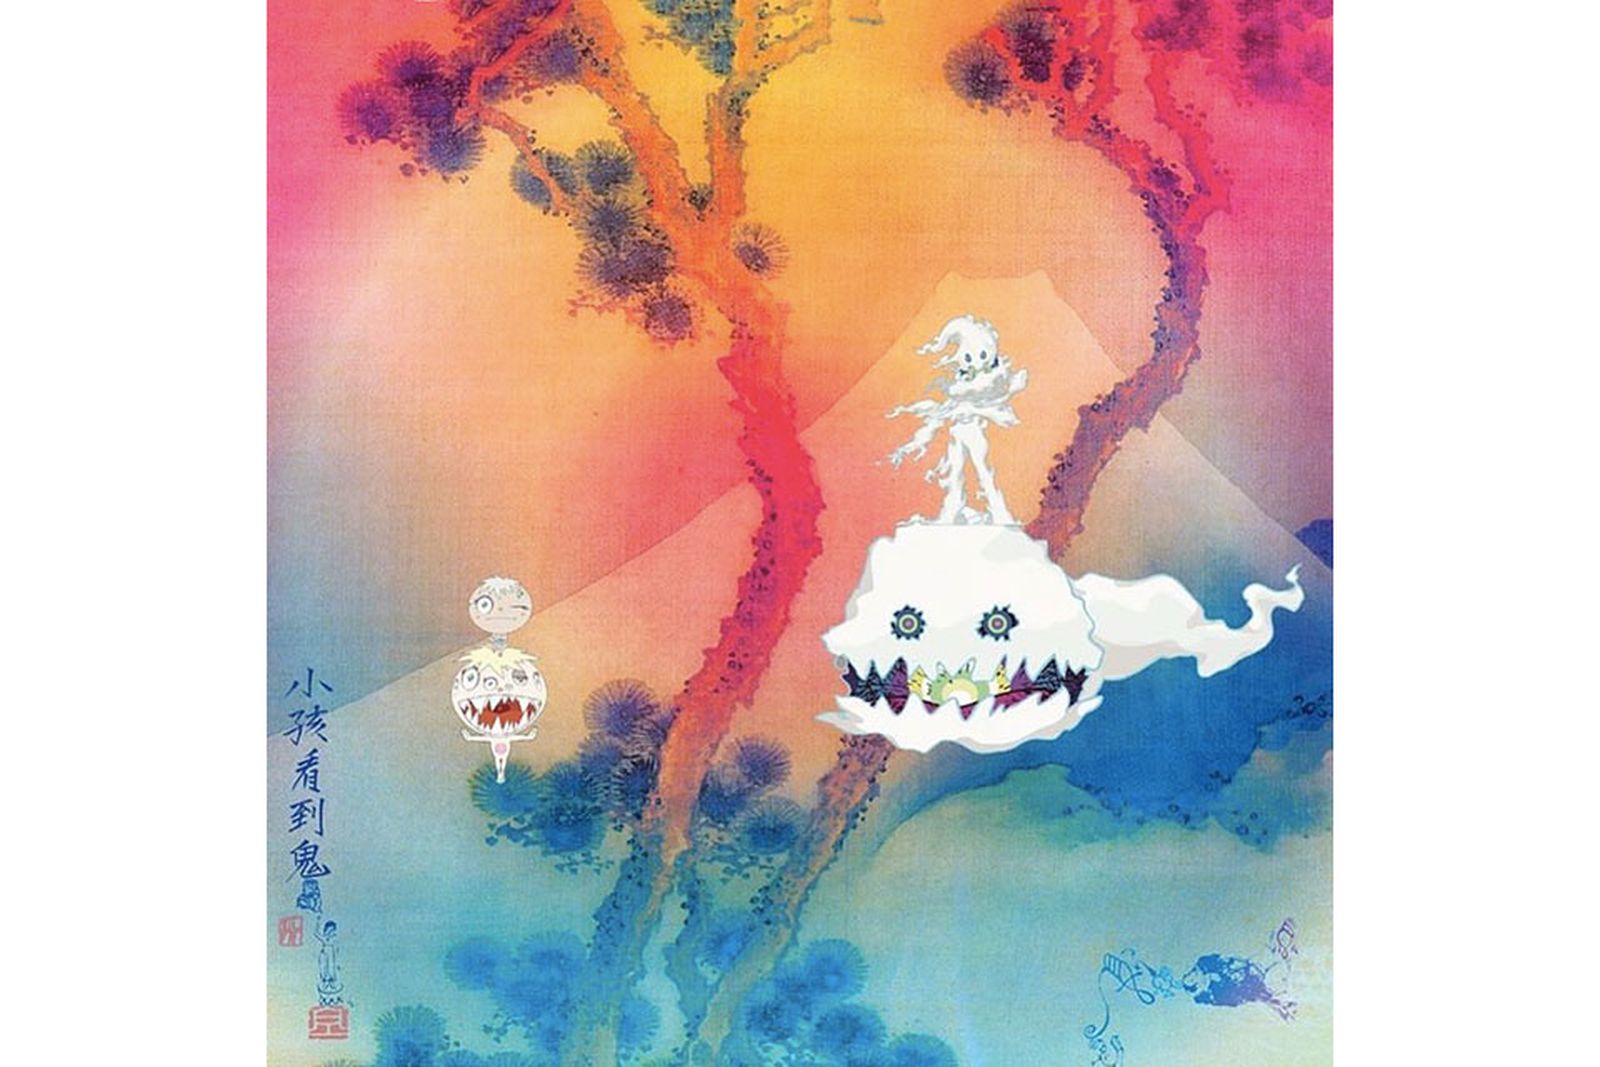 KIDS SEE GHOSTS' Review: Kid Cudi Is Reborn on Instant Classic